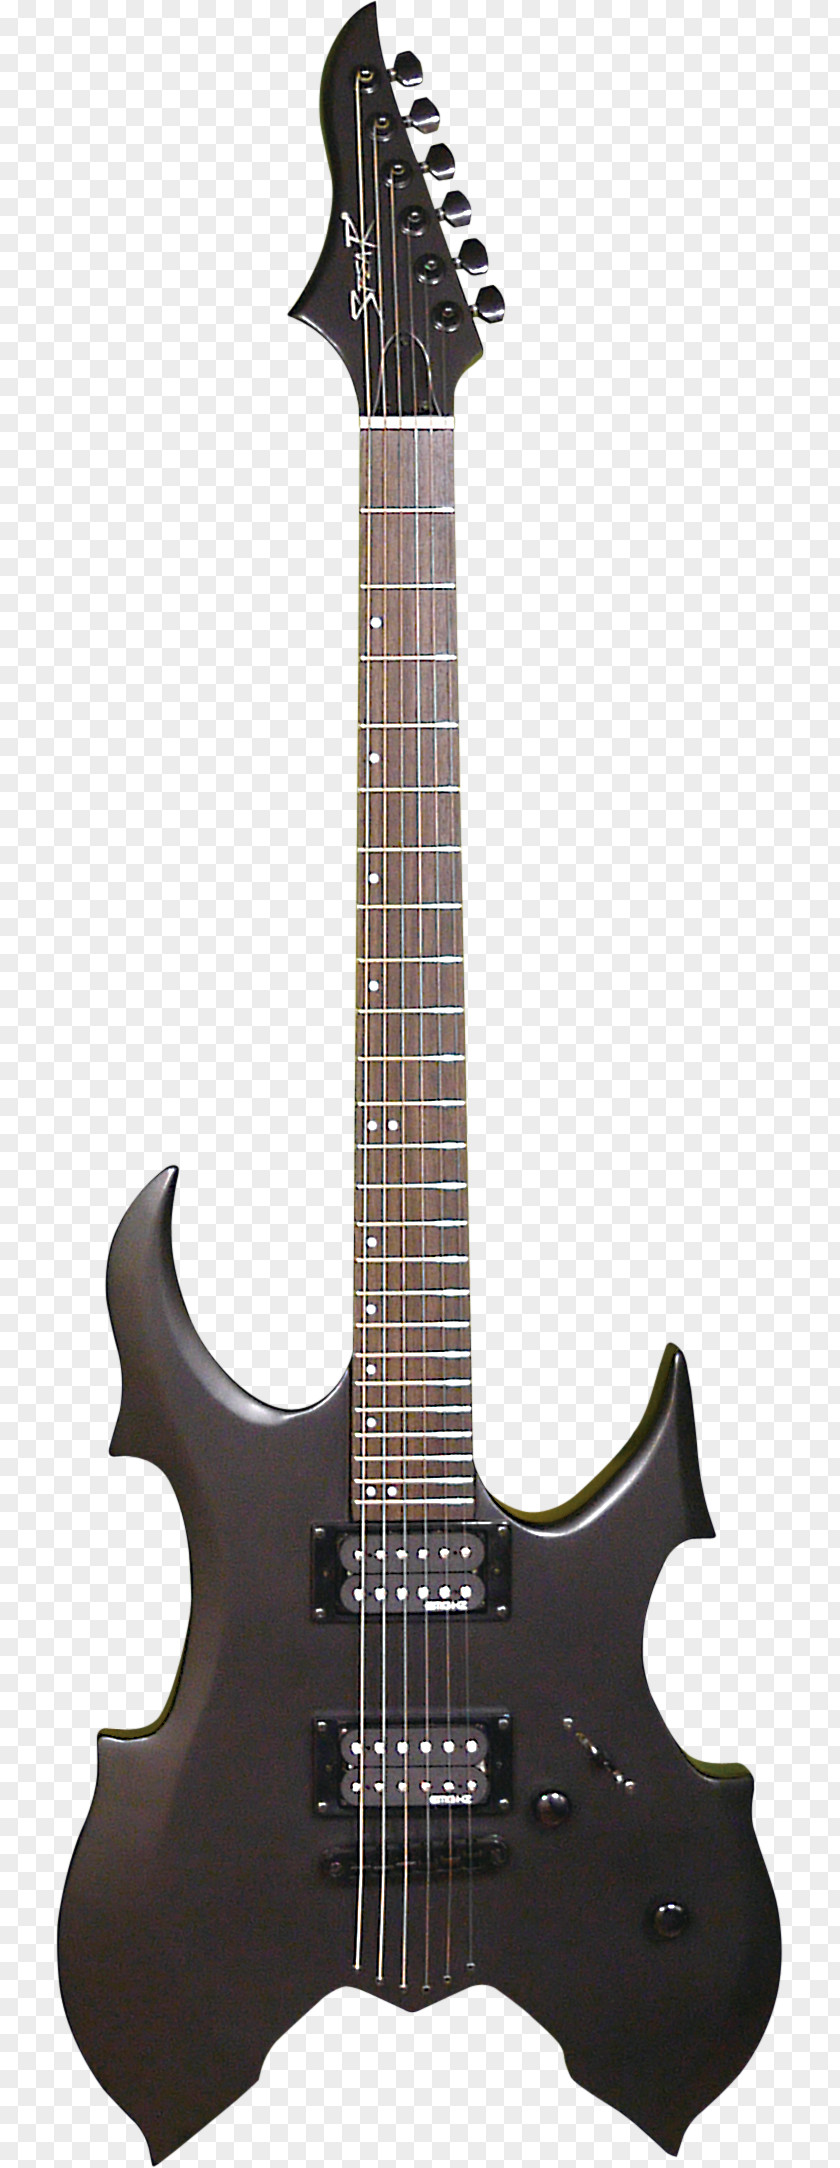 Electric Guitar Variax Ibanez Solid Body PNG